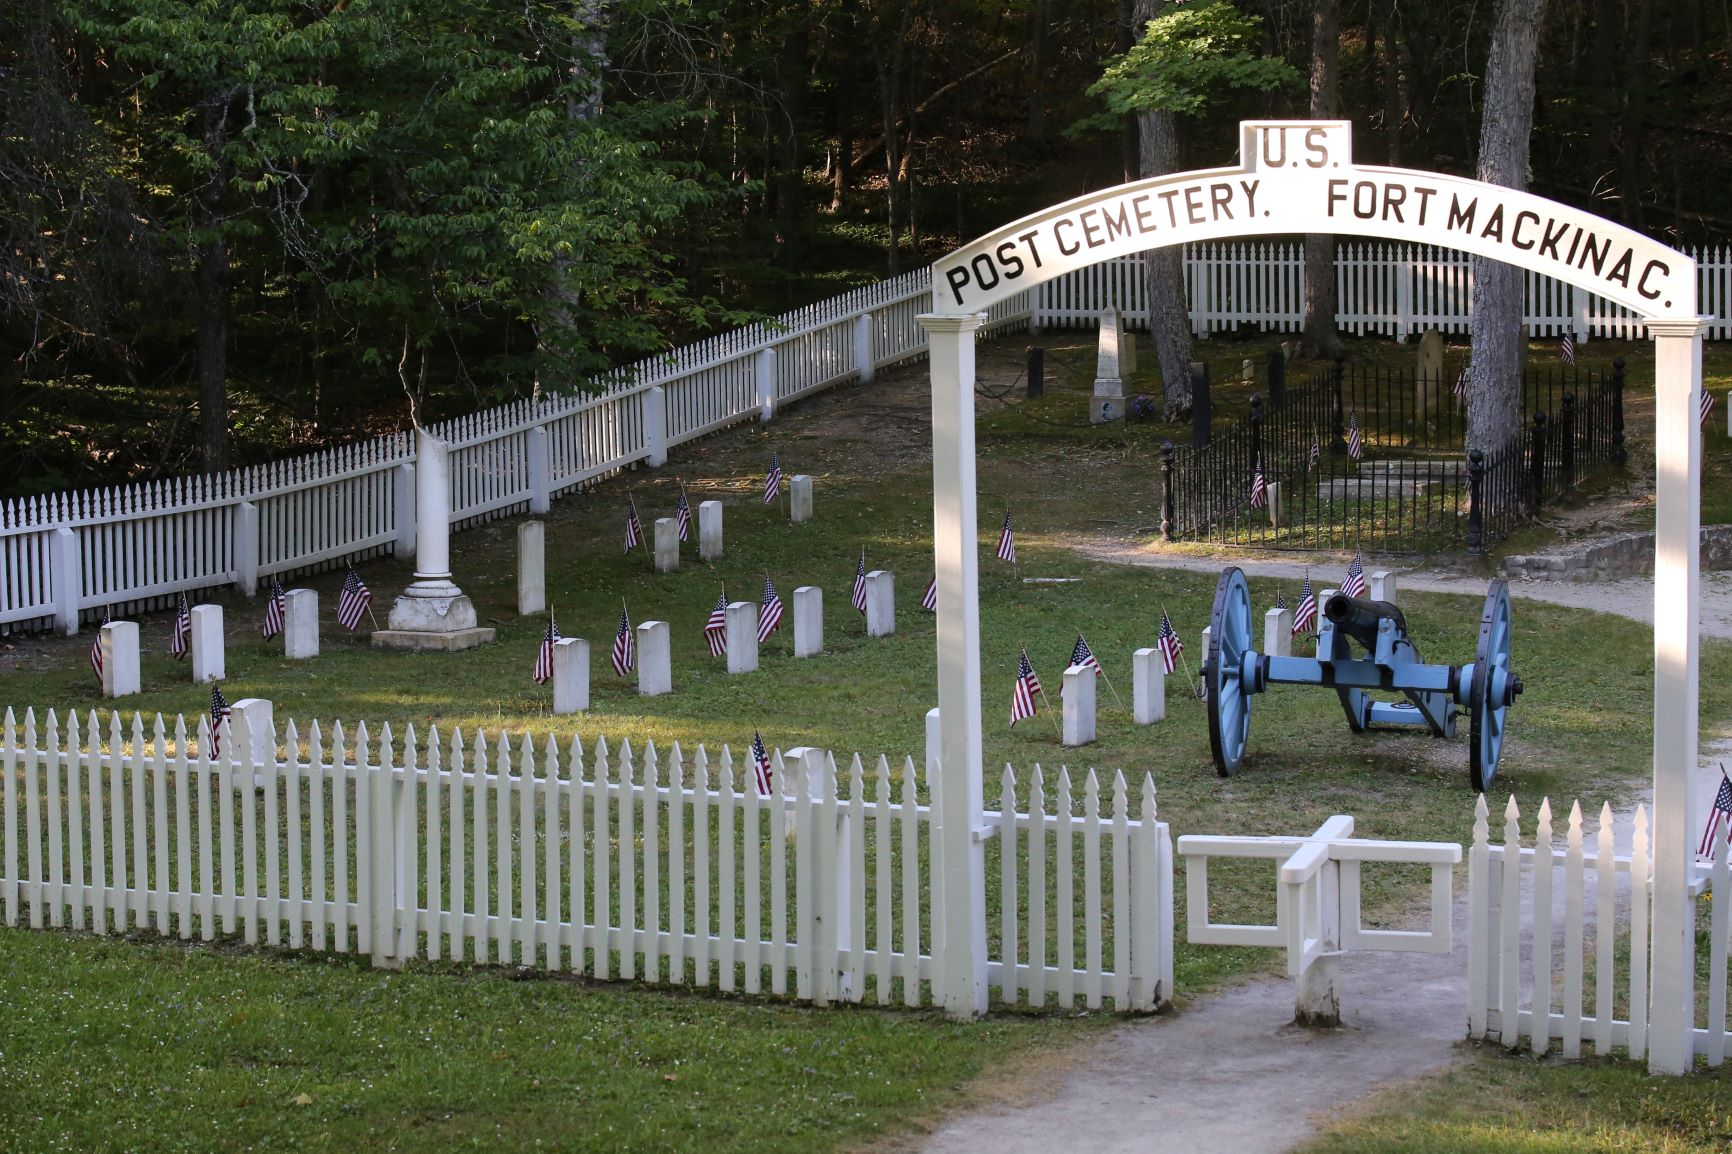 Entrance Gate to Post Cemetery of U.S. Fort Mackinac